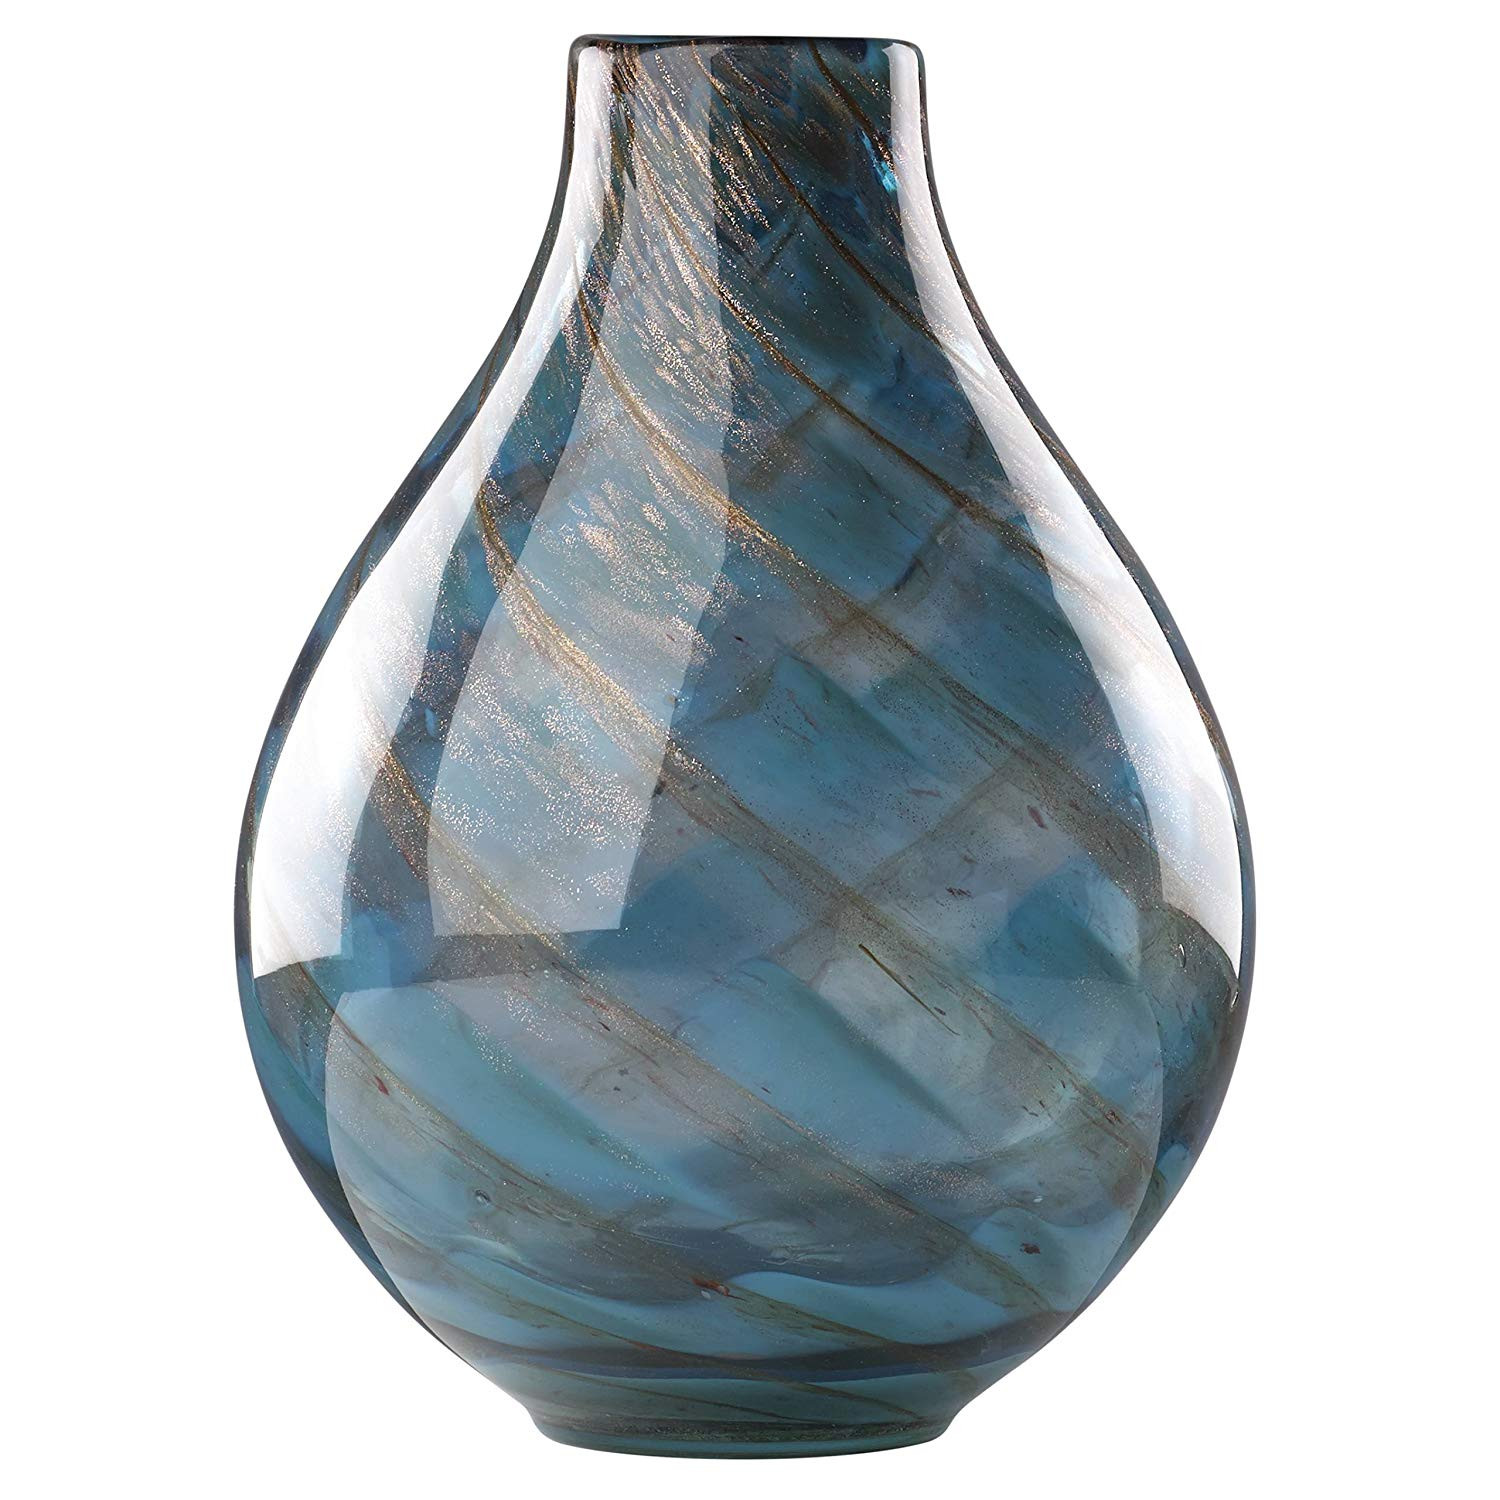 21 Ideal Mikasa Blossom Crystal Vase 2024 free download mikasa blossom crystal vase of amazon com lenox 845435 seaview swirl bottle vase home kitchen pertaining to 91w genb88l sl1500